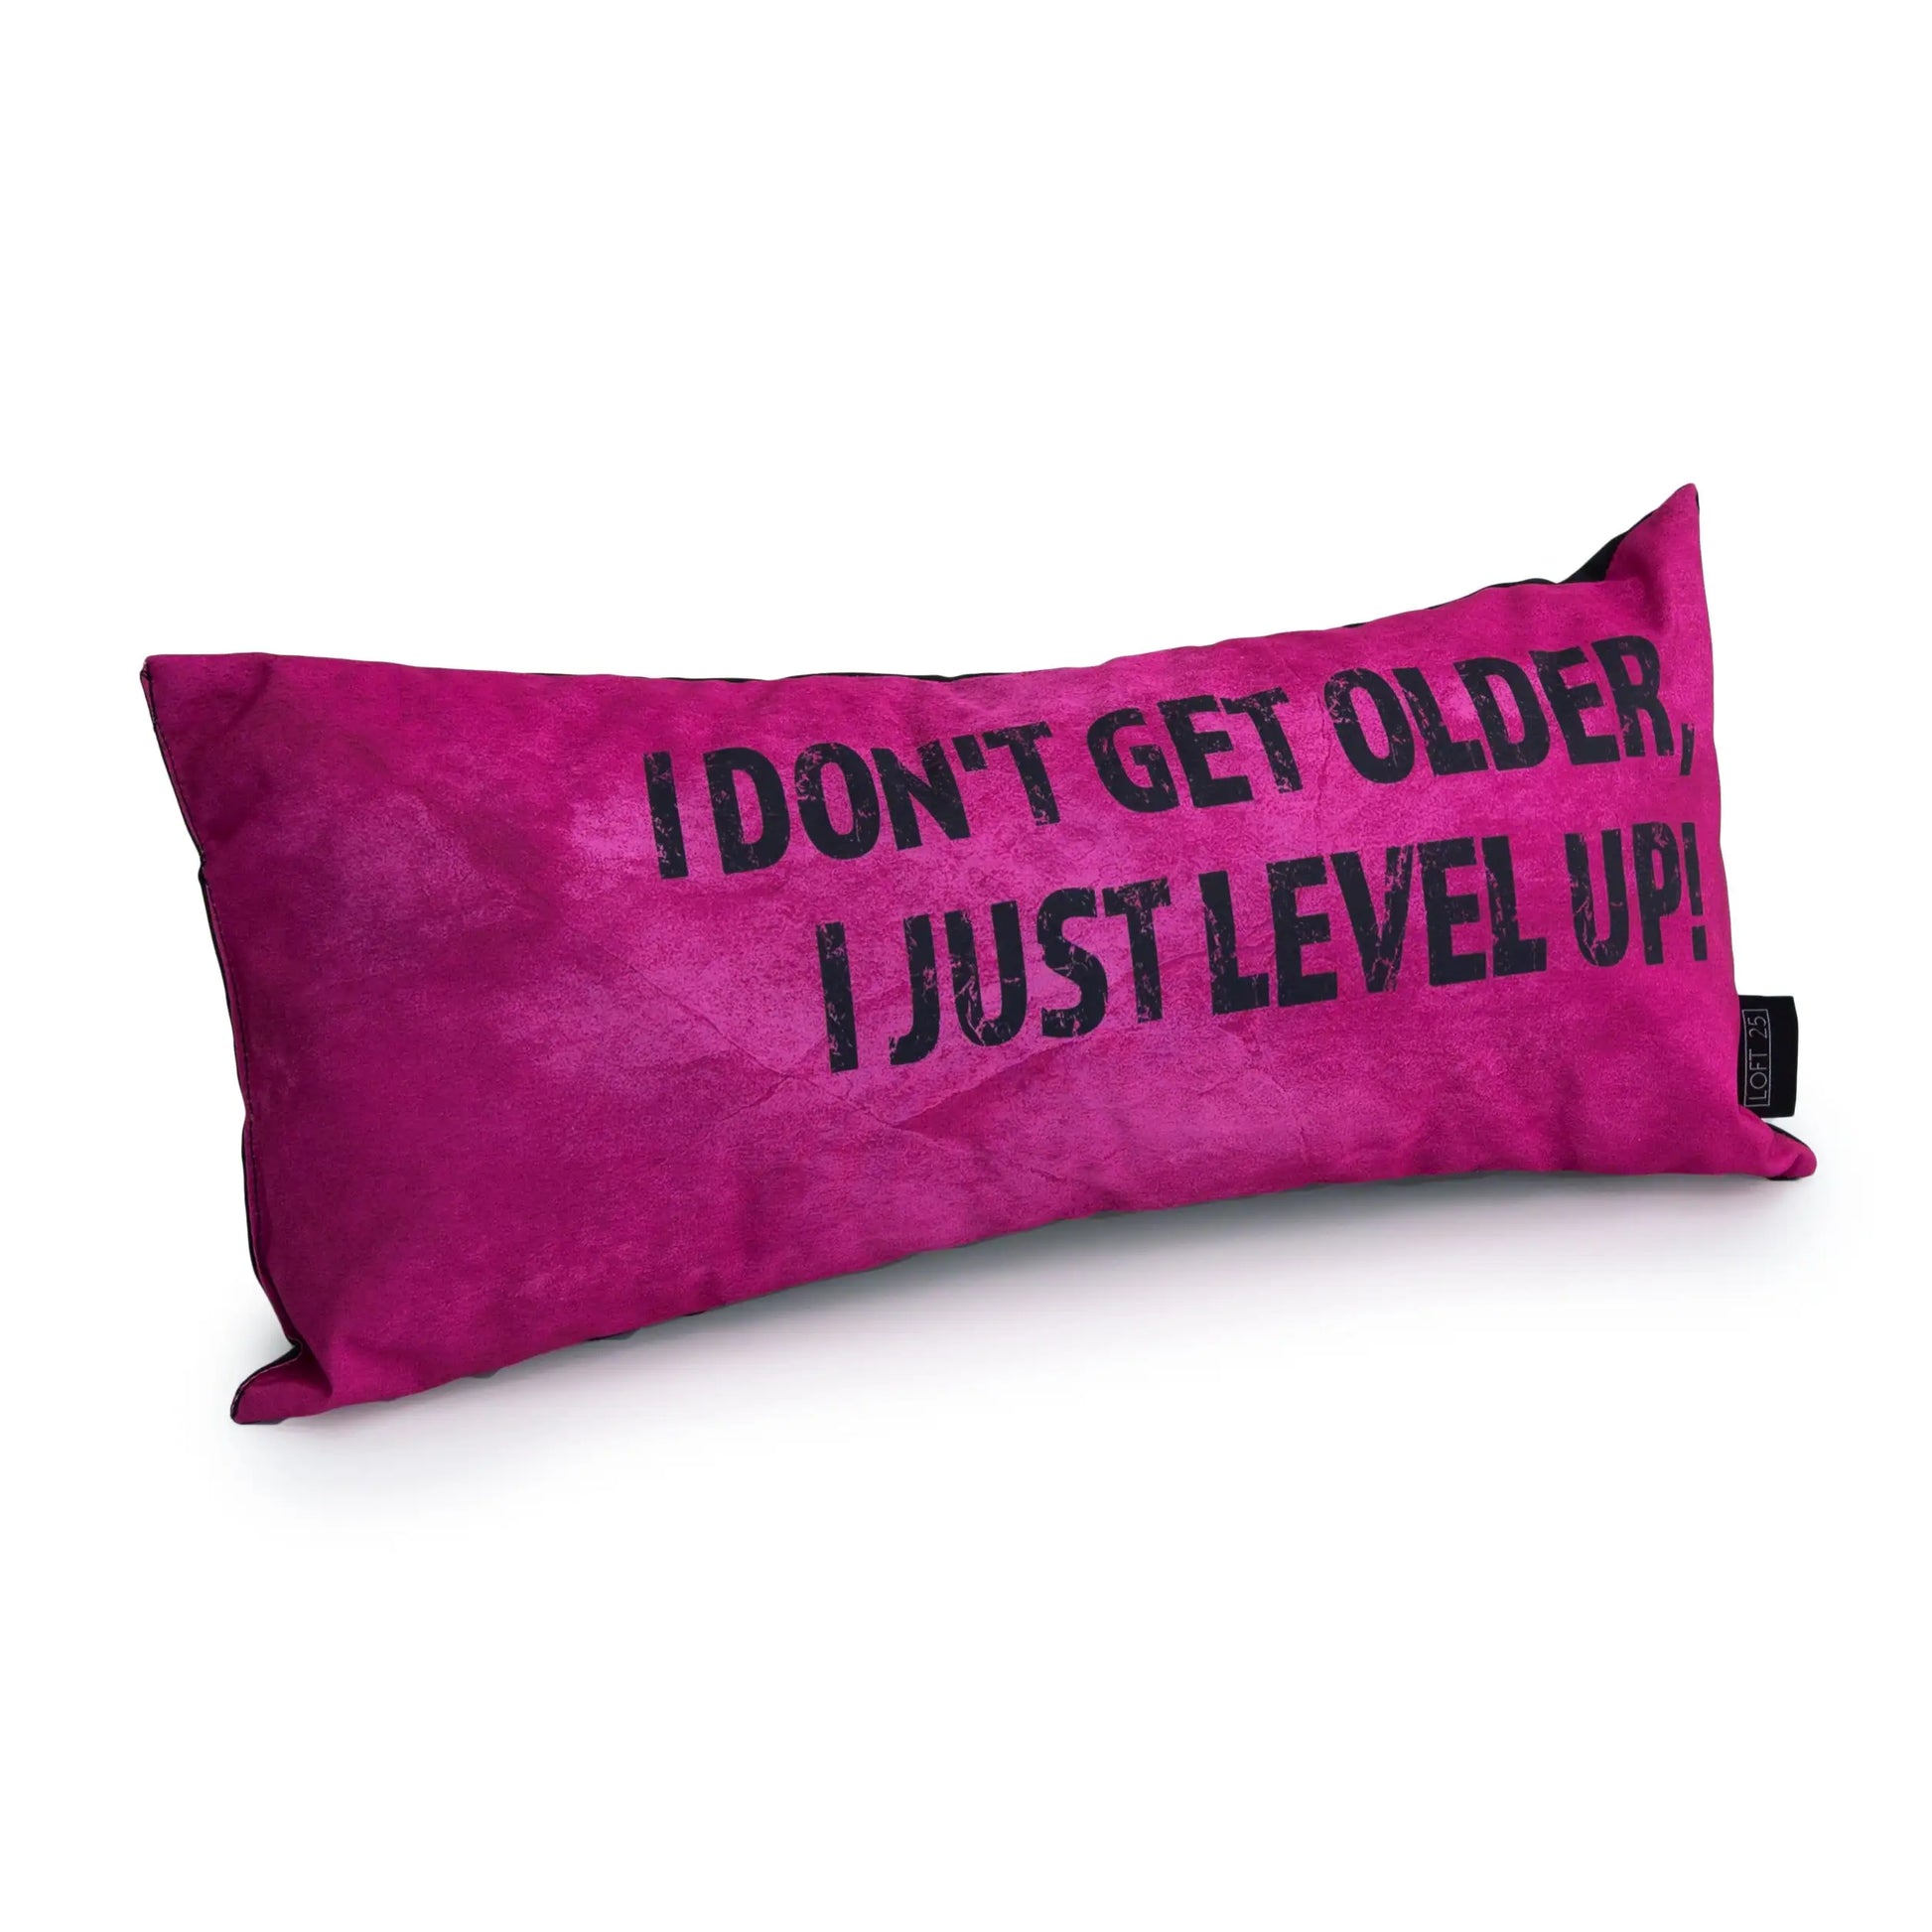 A pink rectangular pillow with the text "I don't get older, I just level up."